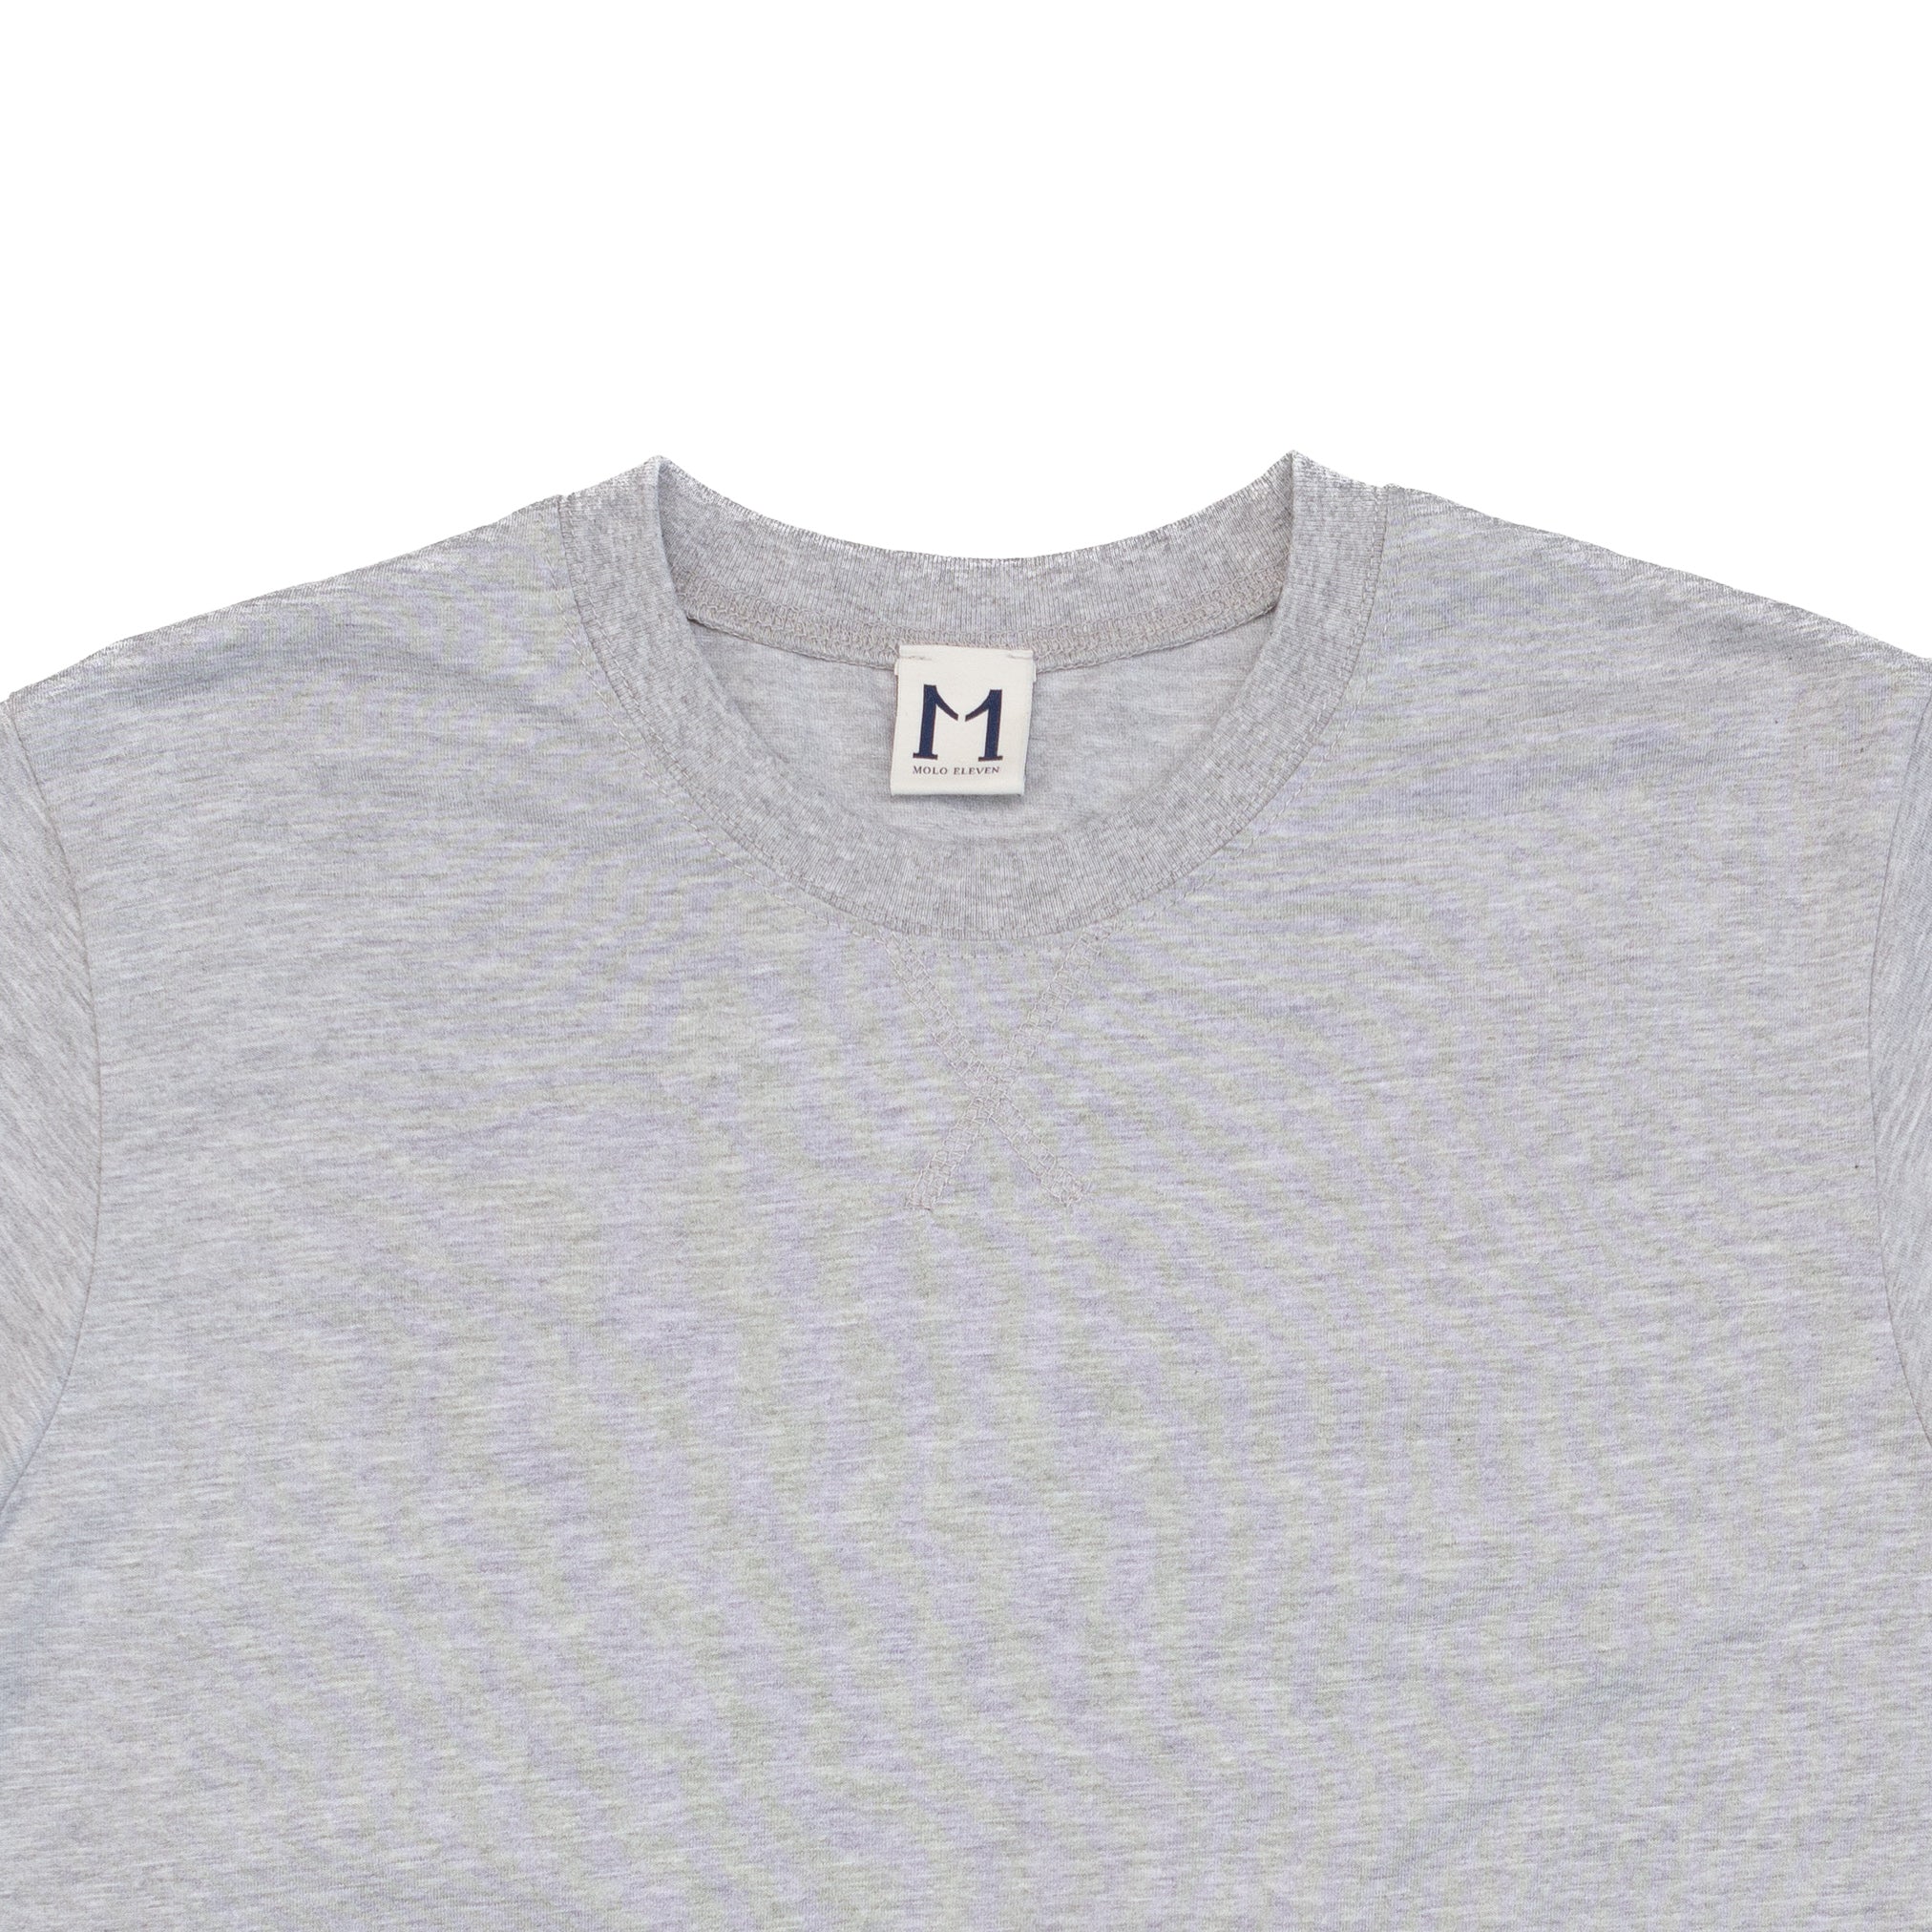 The Grant T-Shirt in Grey